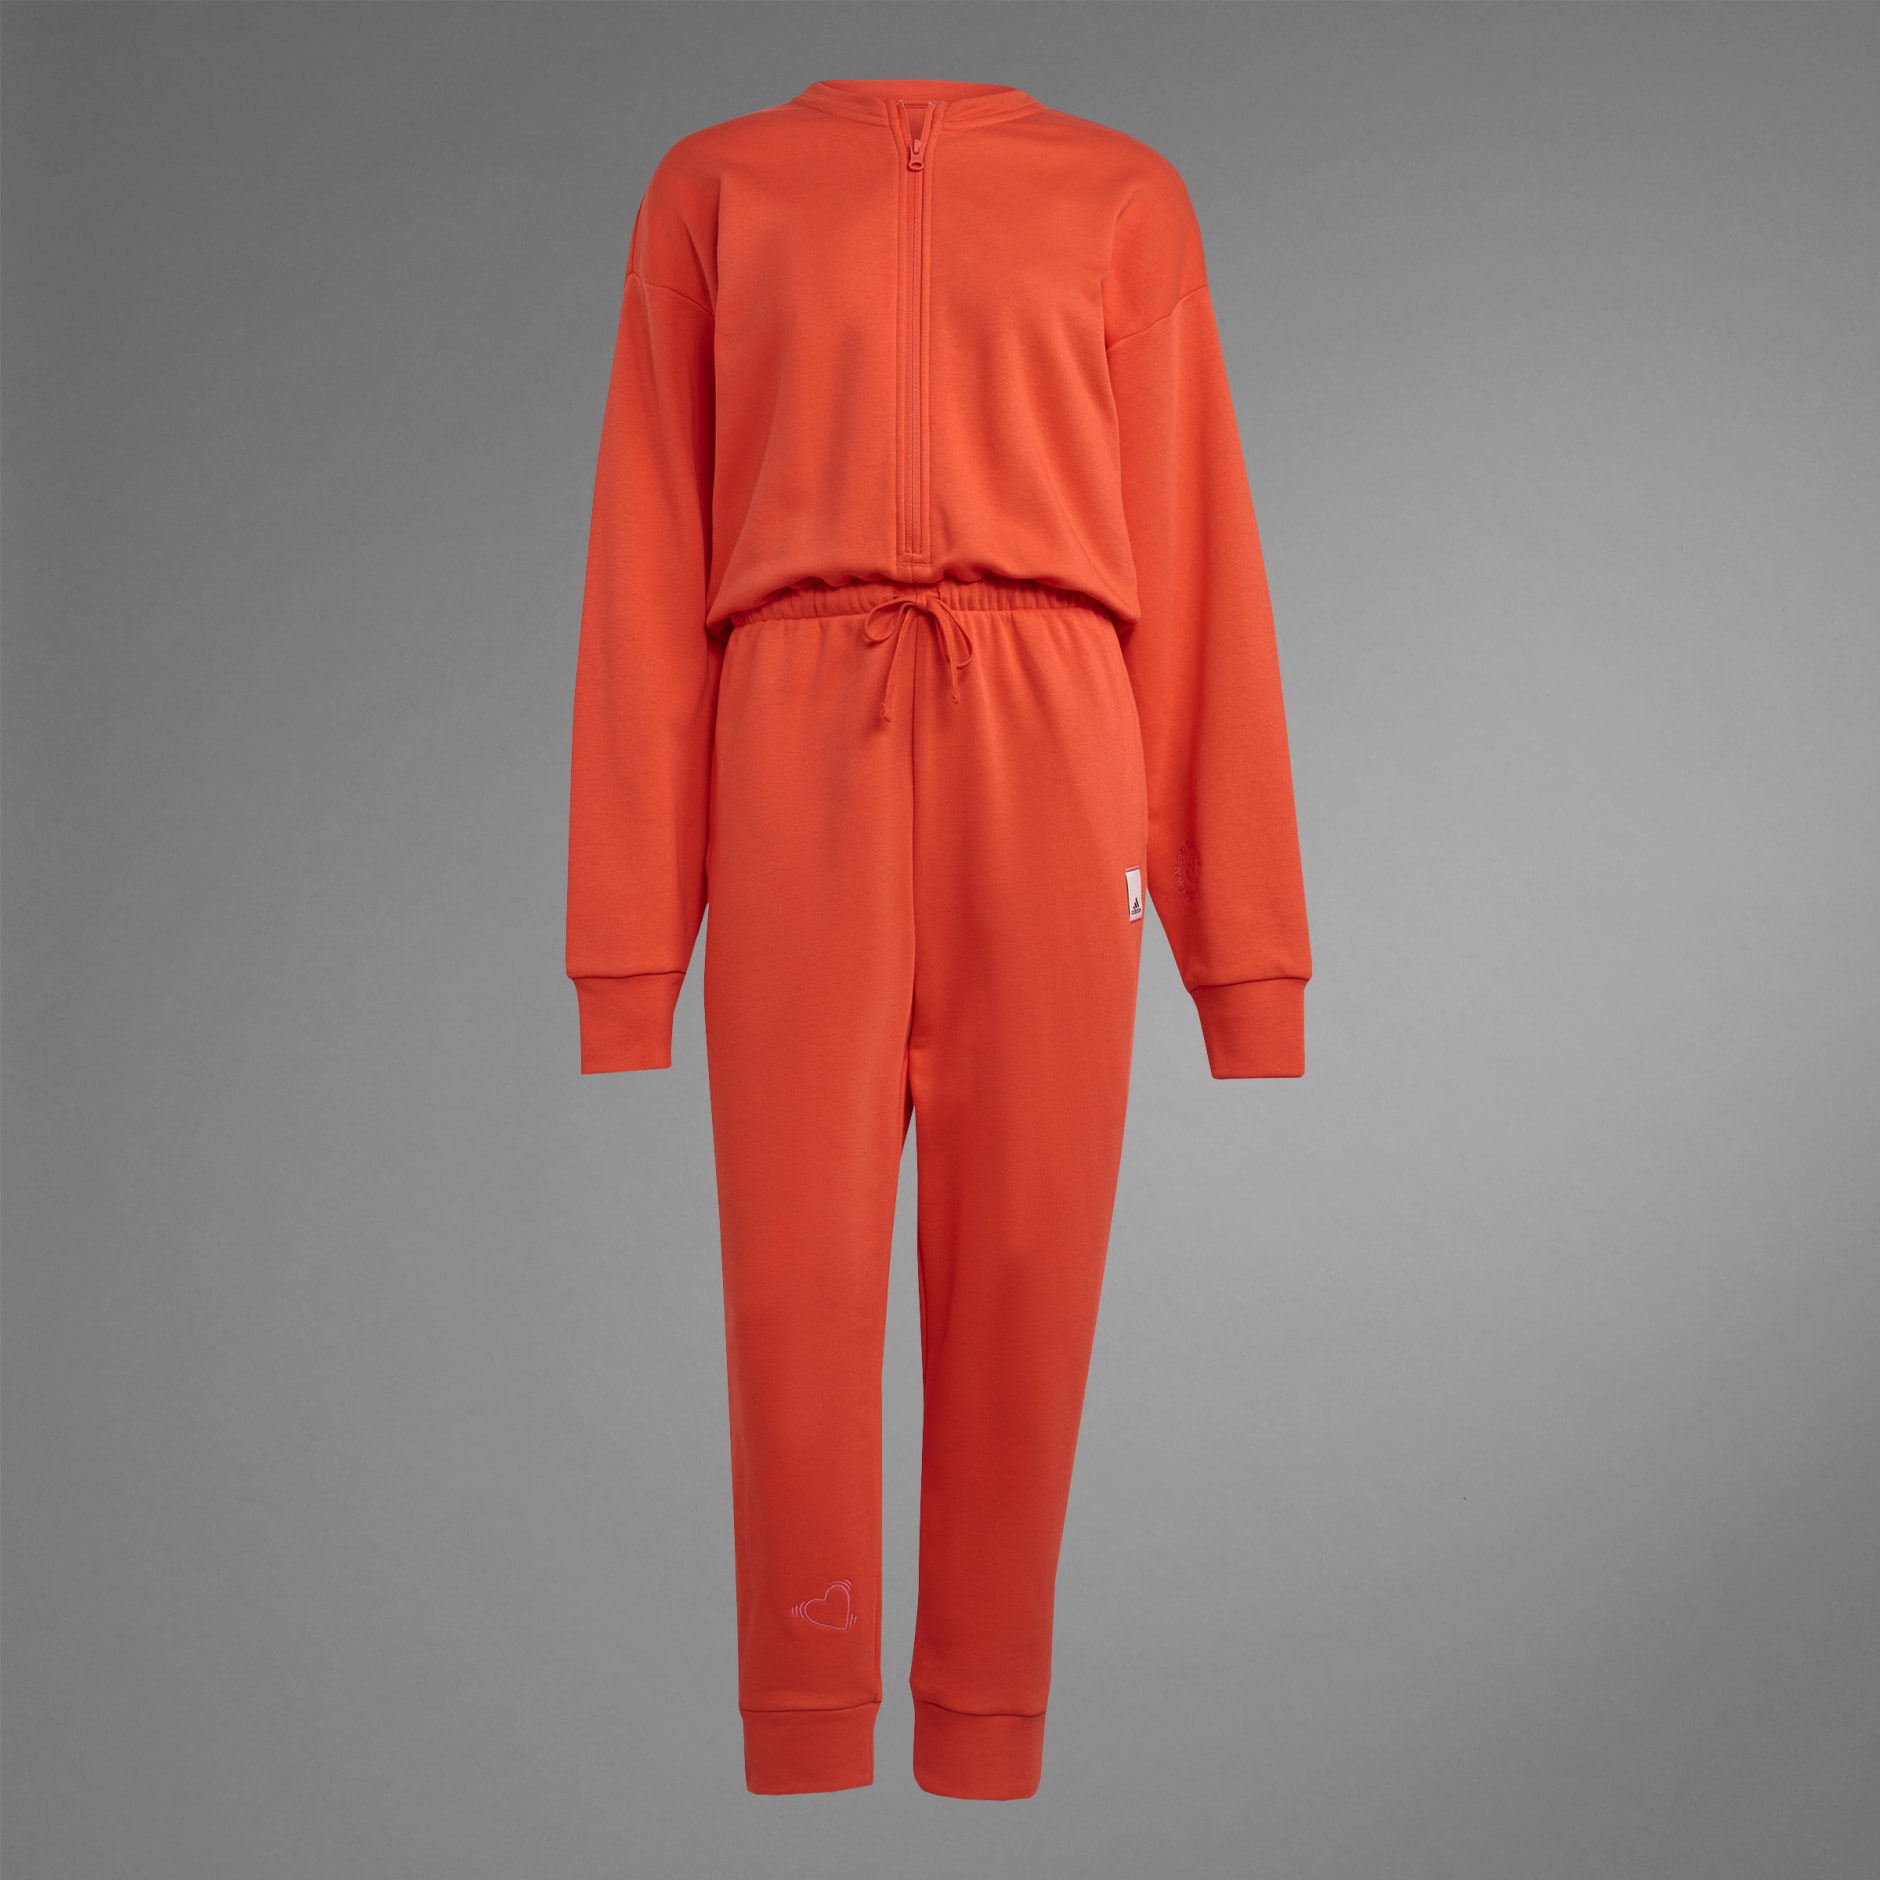 Women's Clothing - Valentine's Day Jumpsuit - Red | adidas Egypt